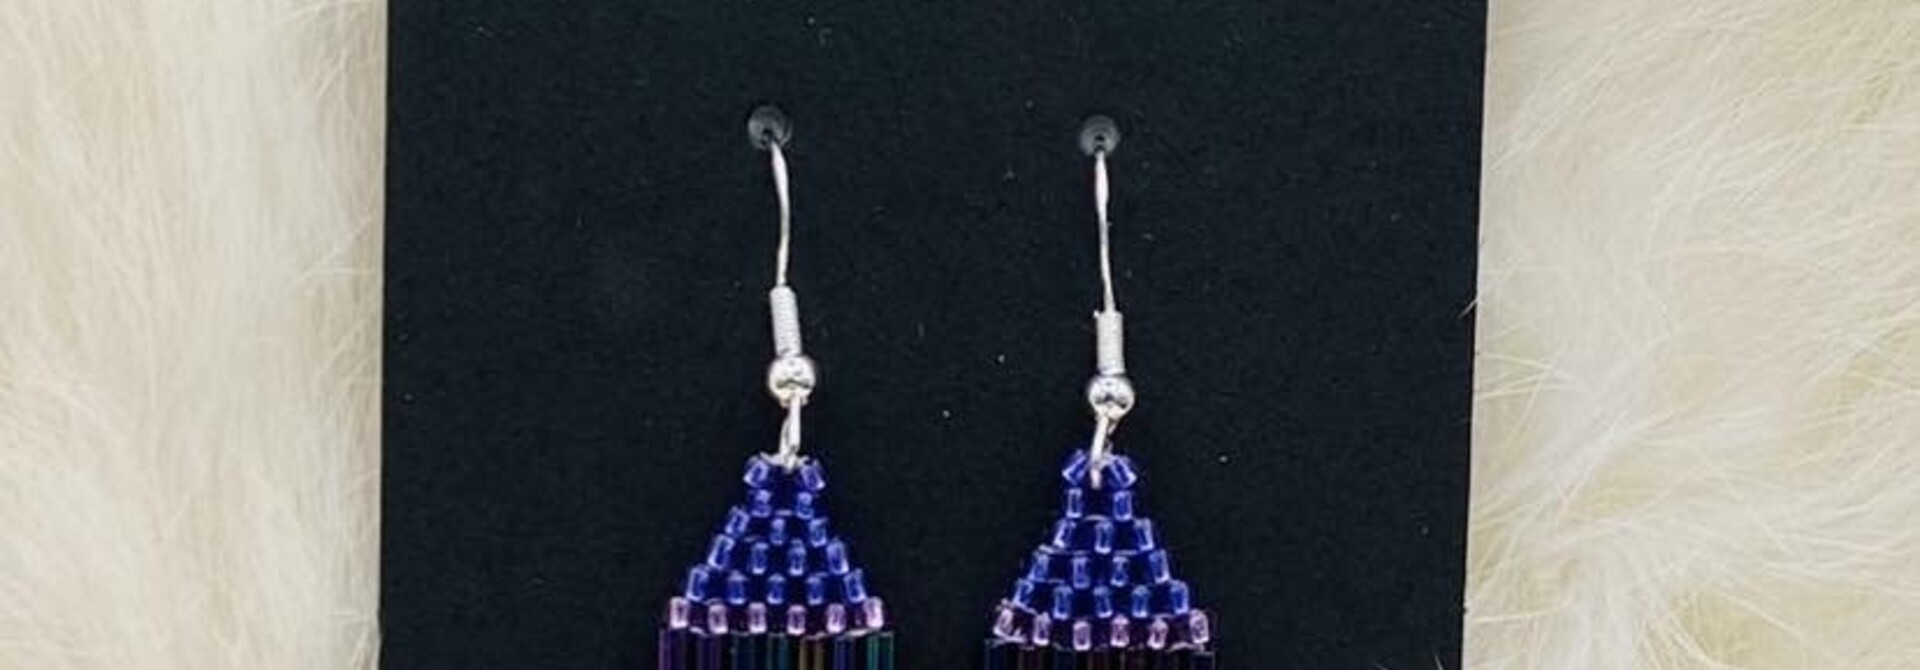 Beaded Earrings by Little Spark Cree-ations / Small - Purple